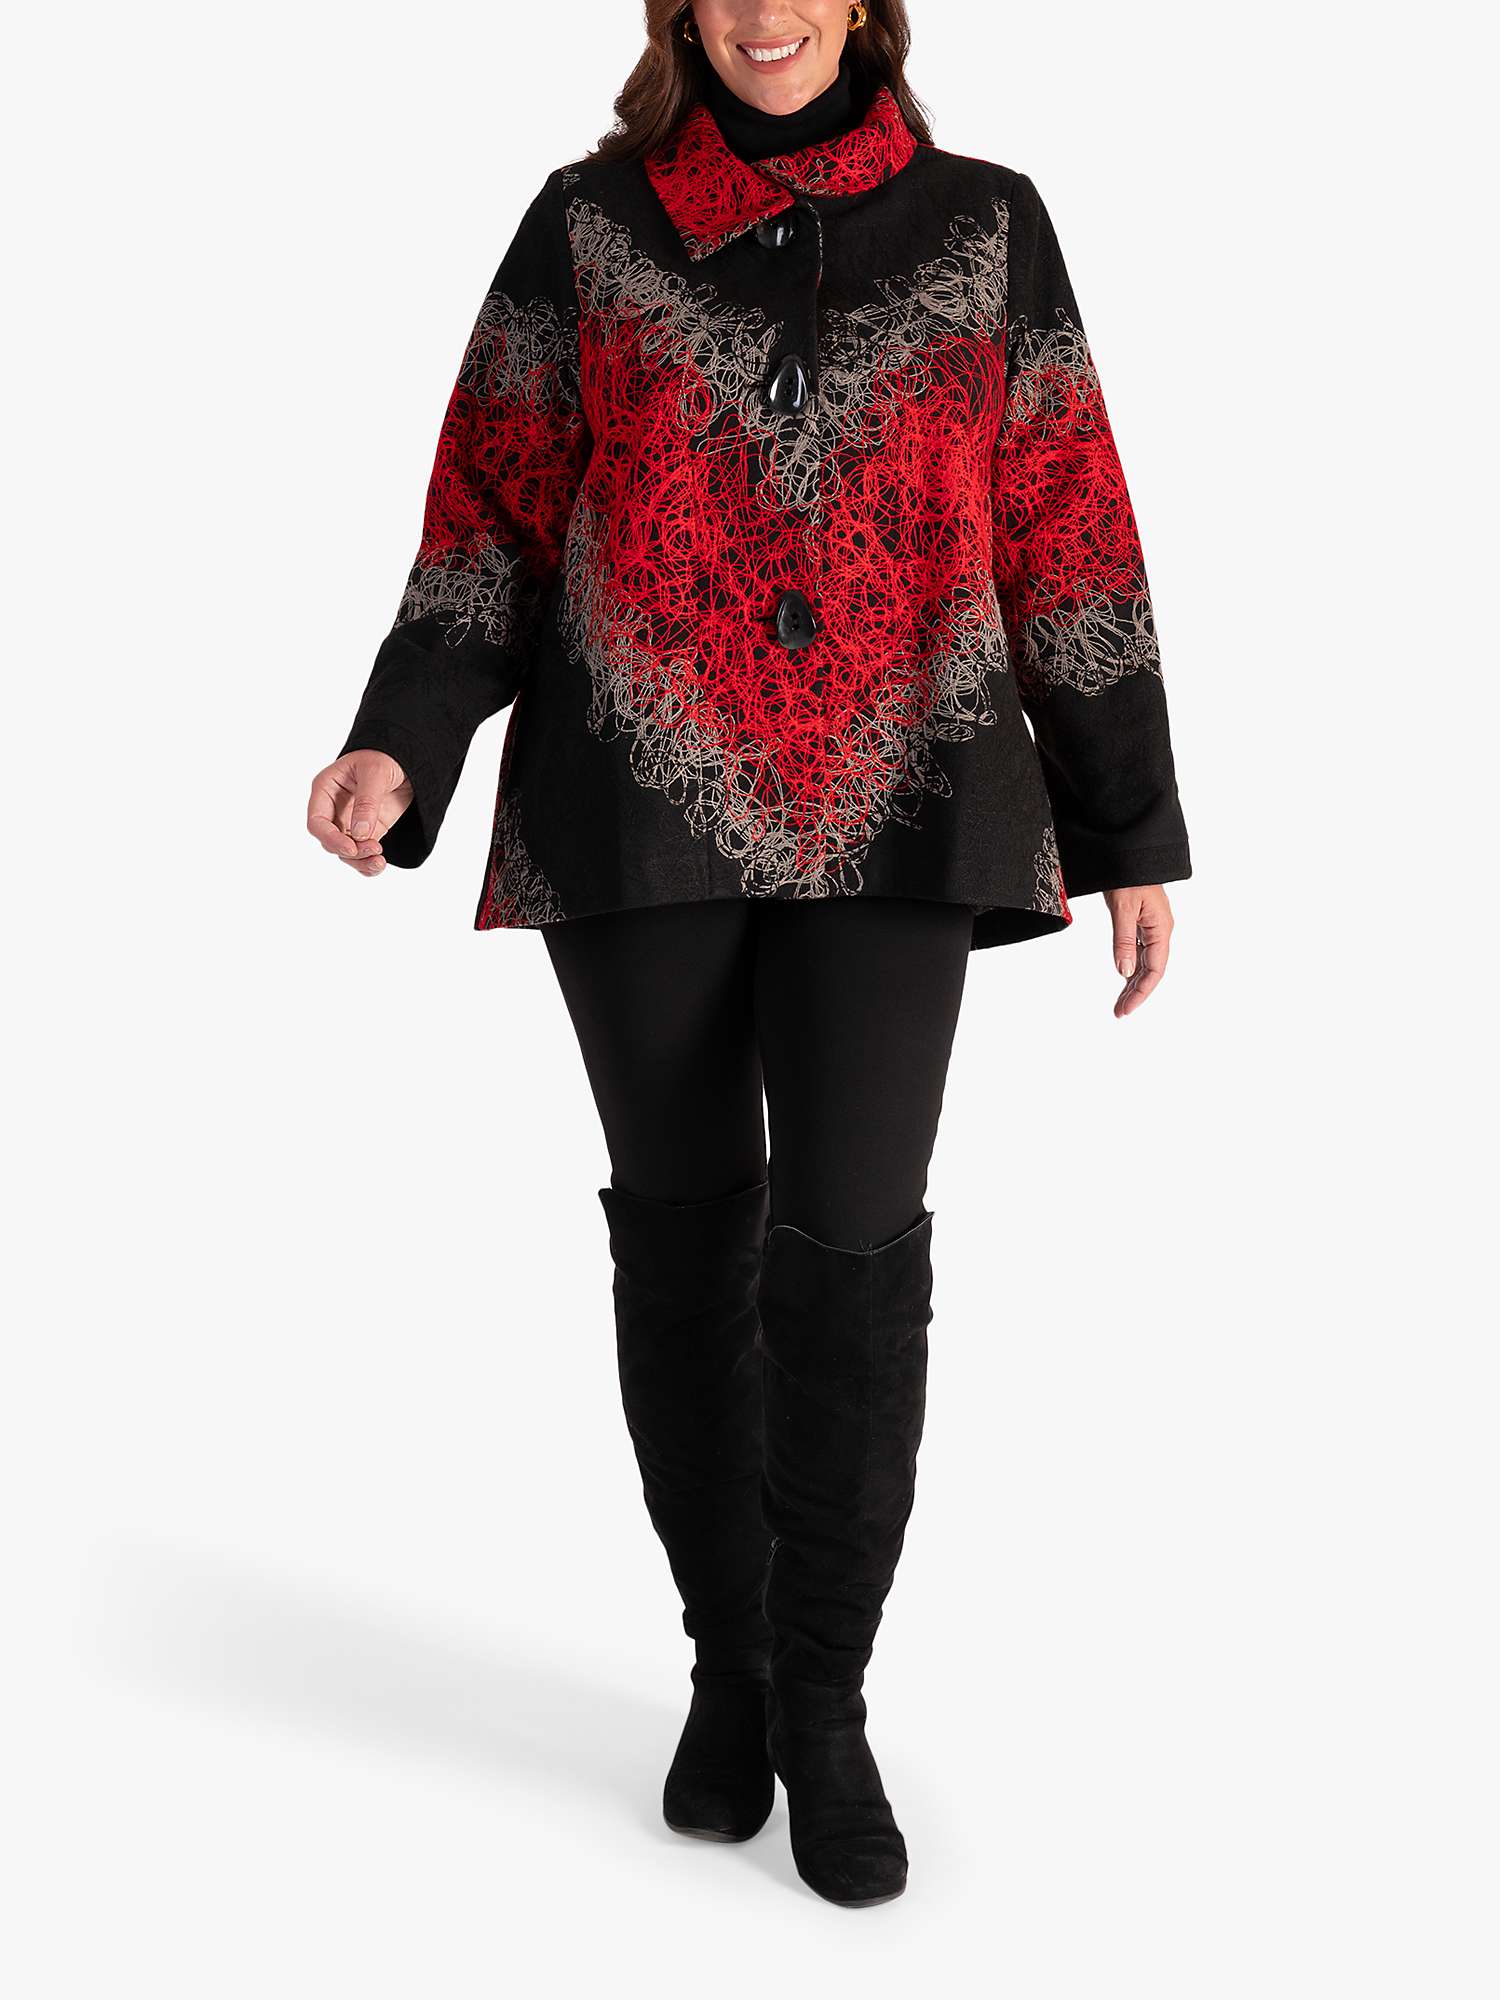 Buy chesca Scribble Embroidered Jacket, Black/Red Online at johnlewis.com